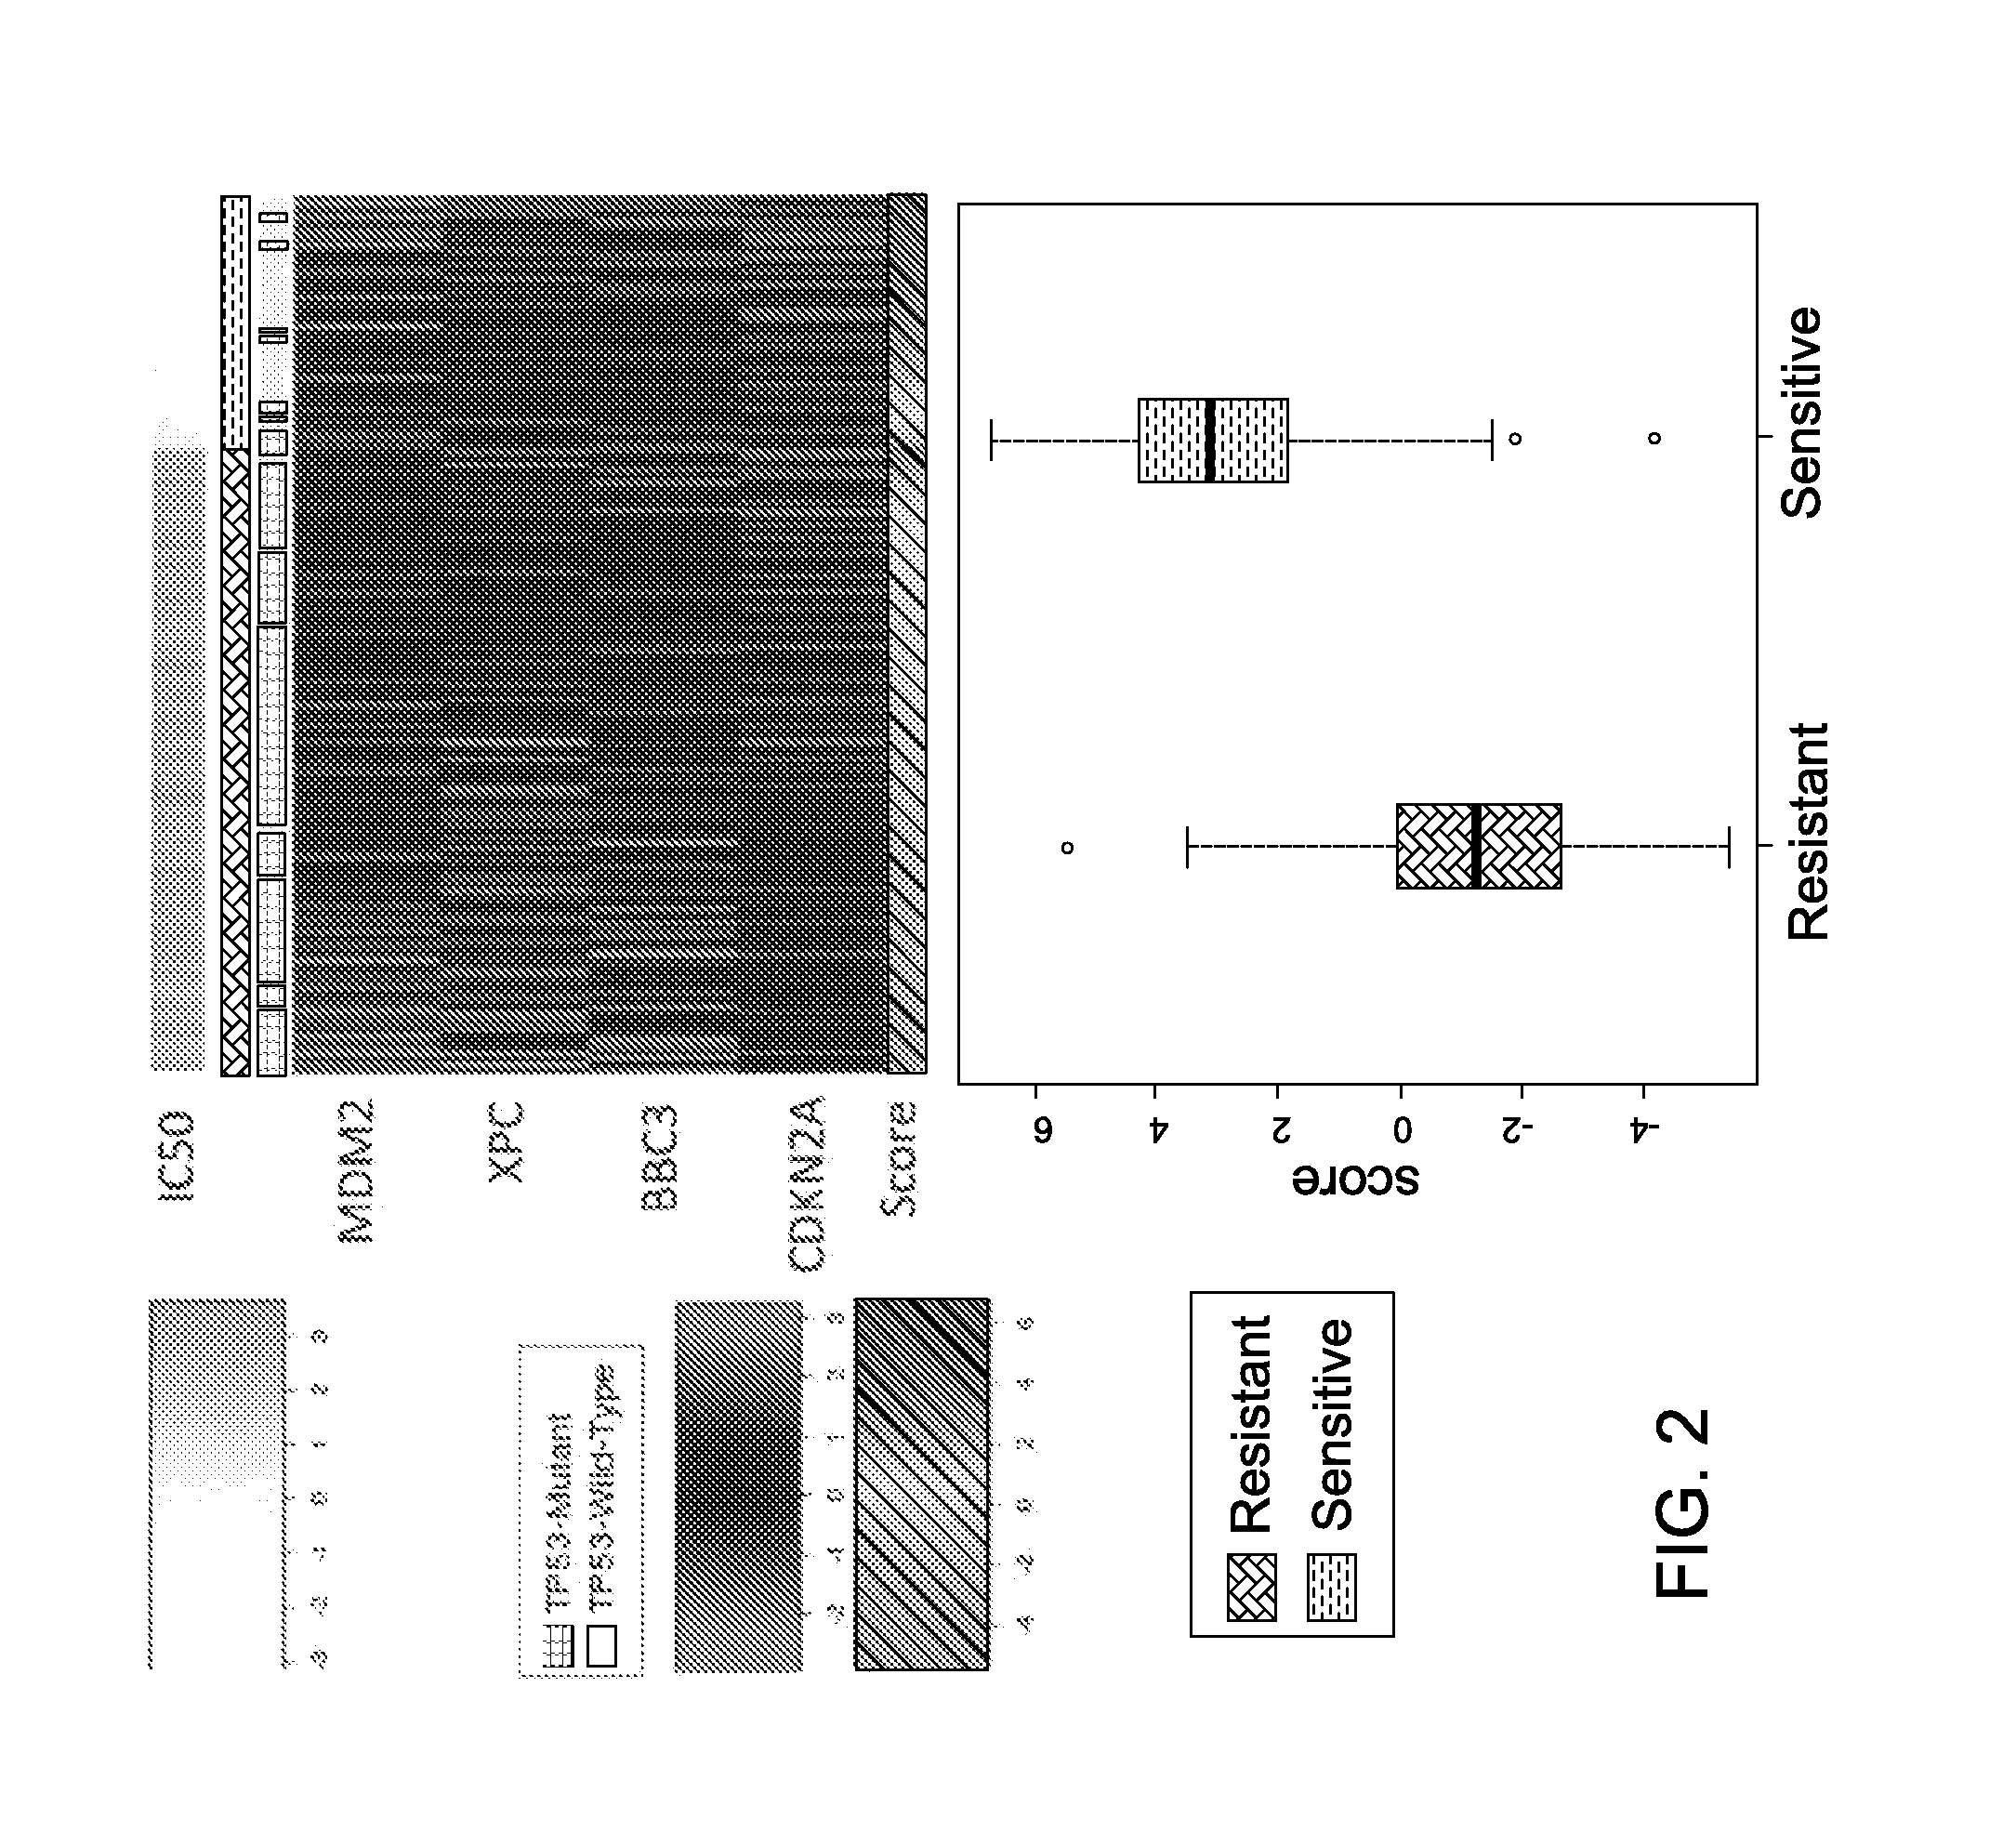 Mrna-based gene expression for personalizing patient cancer therapy with an MDM2 antagonist